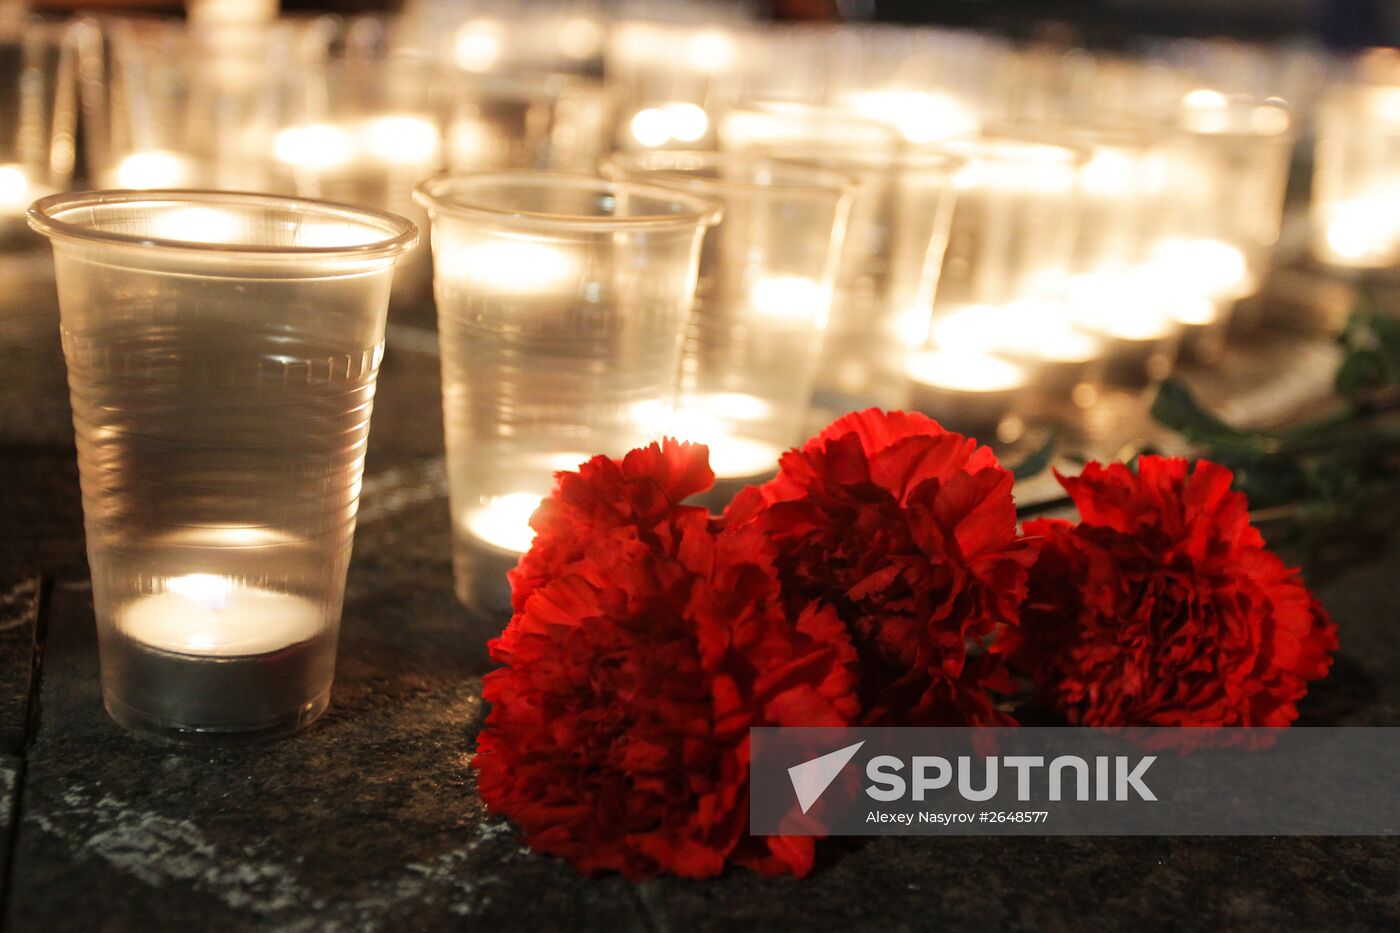 The Candle of Memory event in Kazan